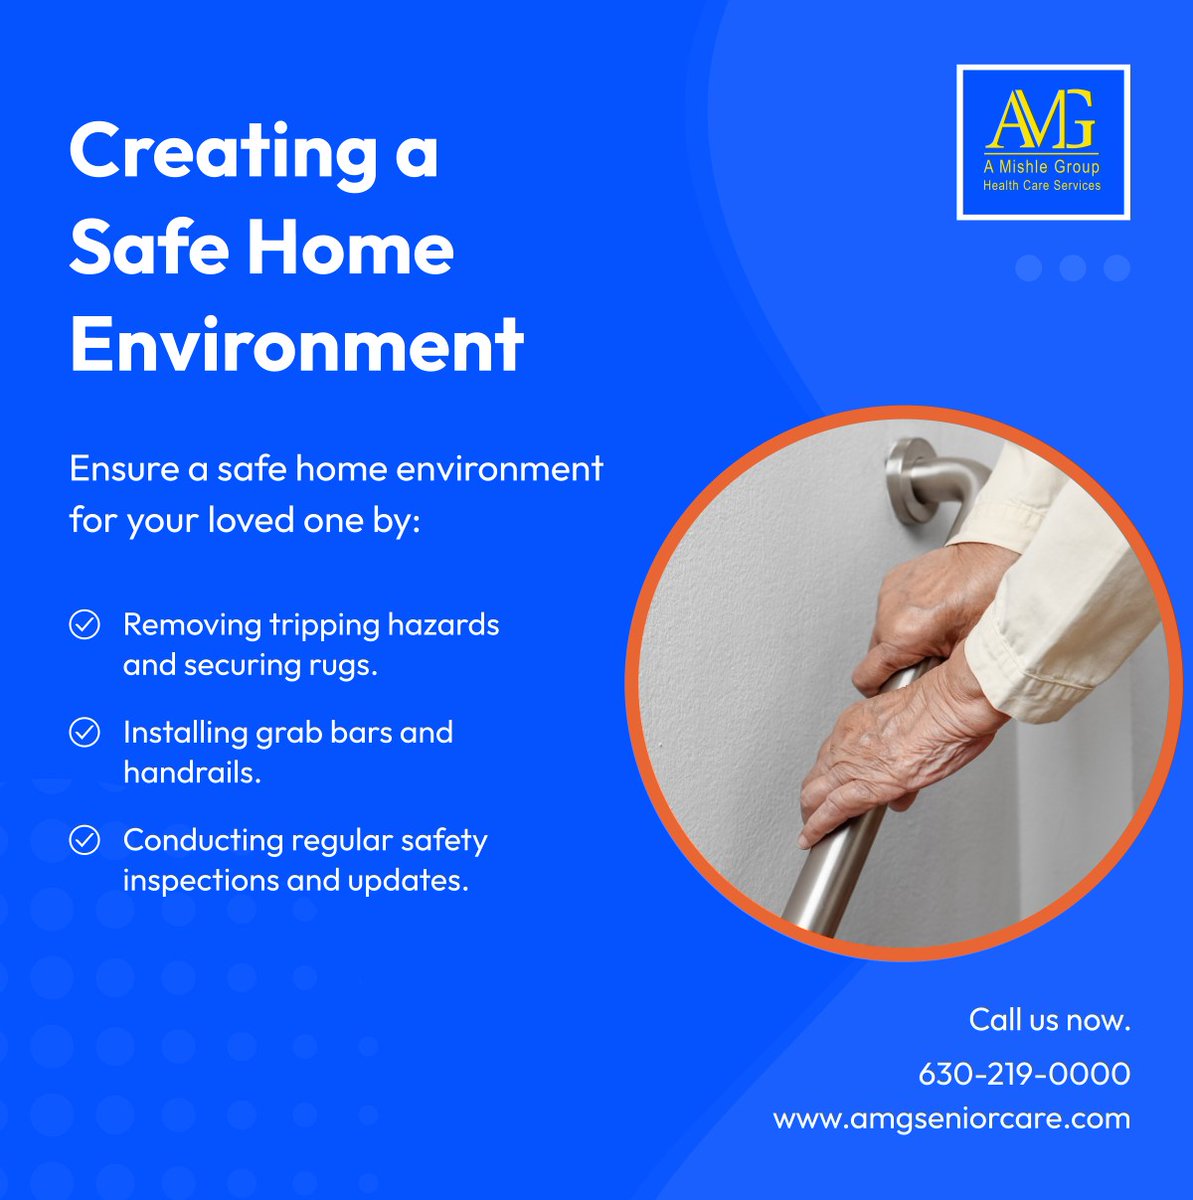 A safe home is essential for peace of mind. Implement these simple yet effective tips to create a secure environment for your loved one. 

#HomeSafety #BloomingdaleIL #HomeCare